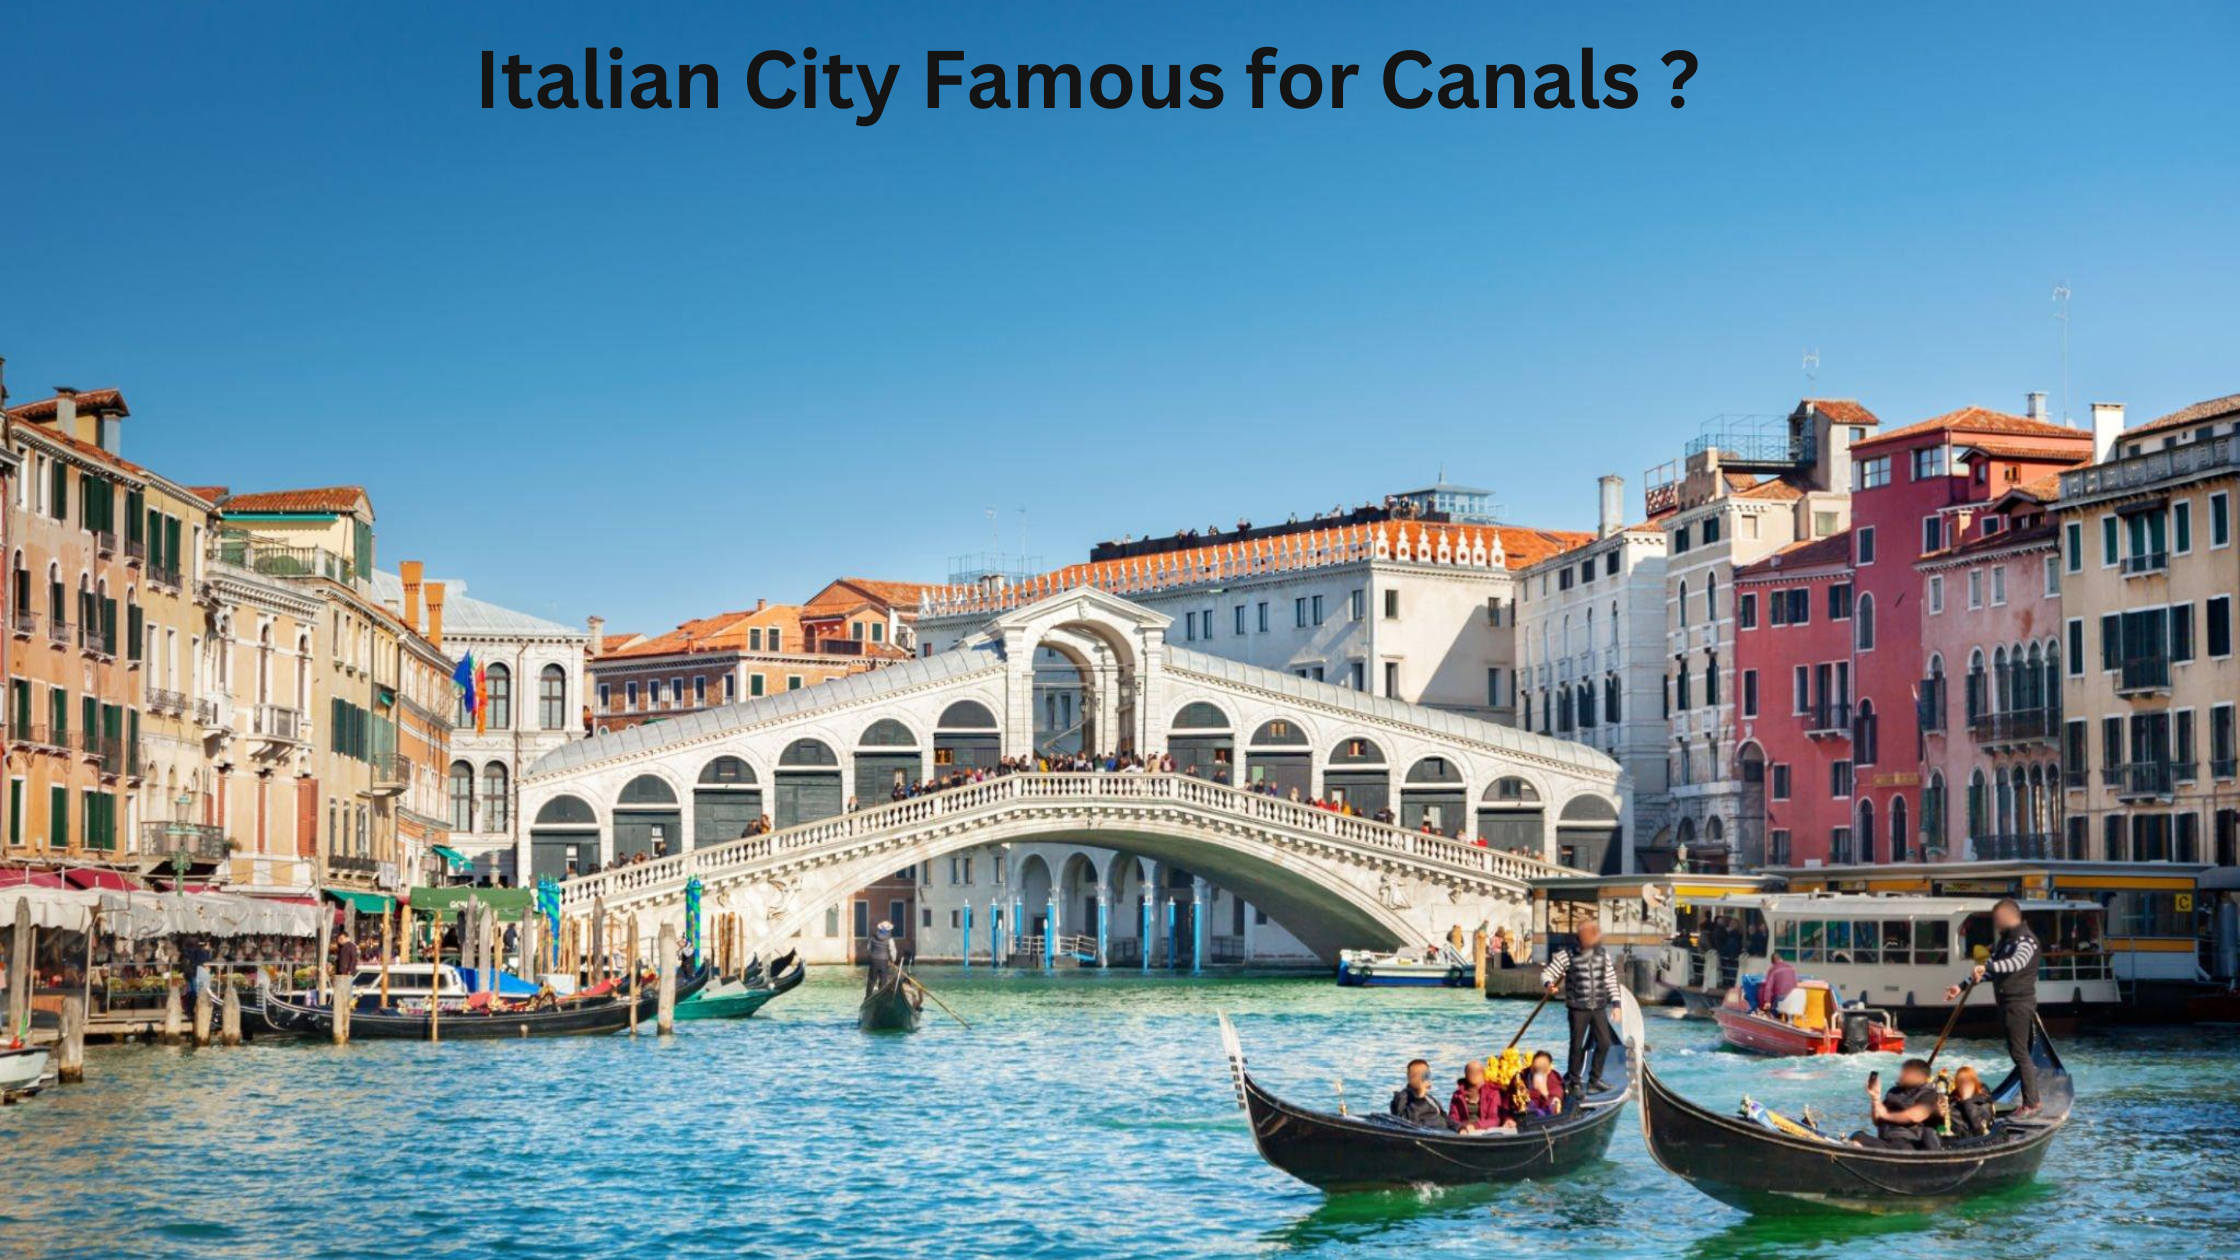 Italian City Famous for Canals